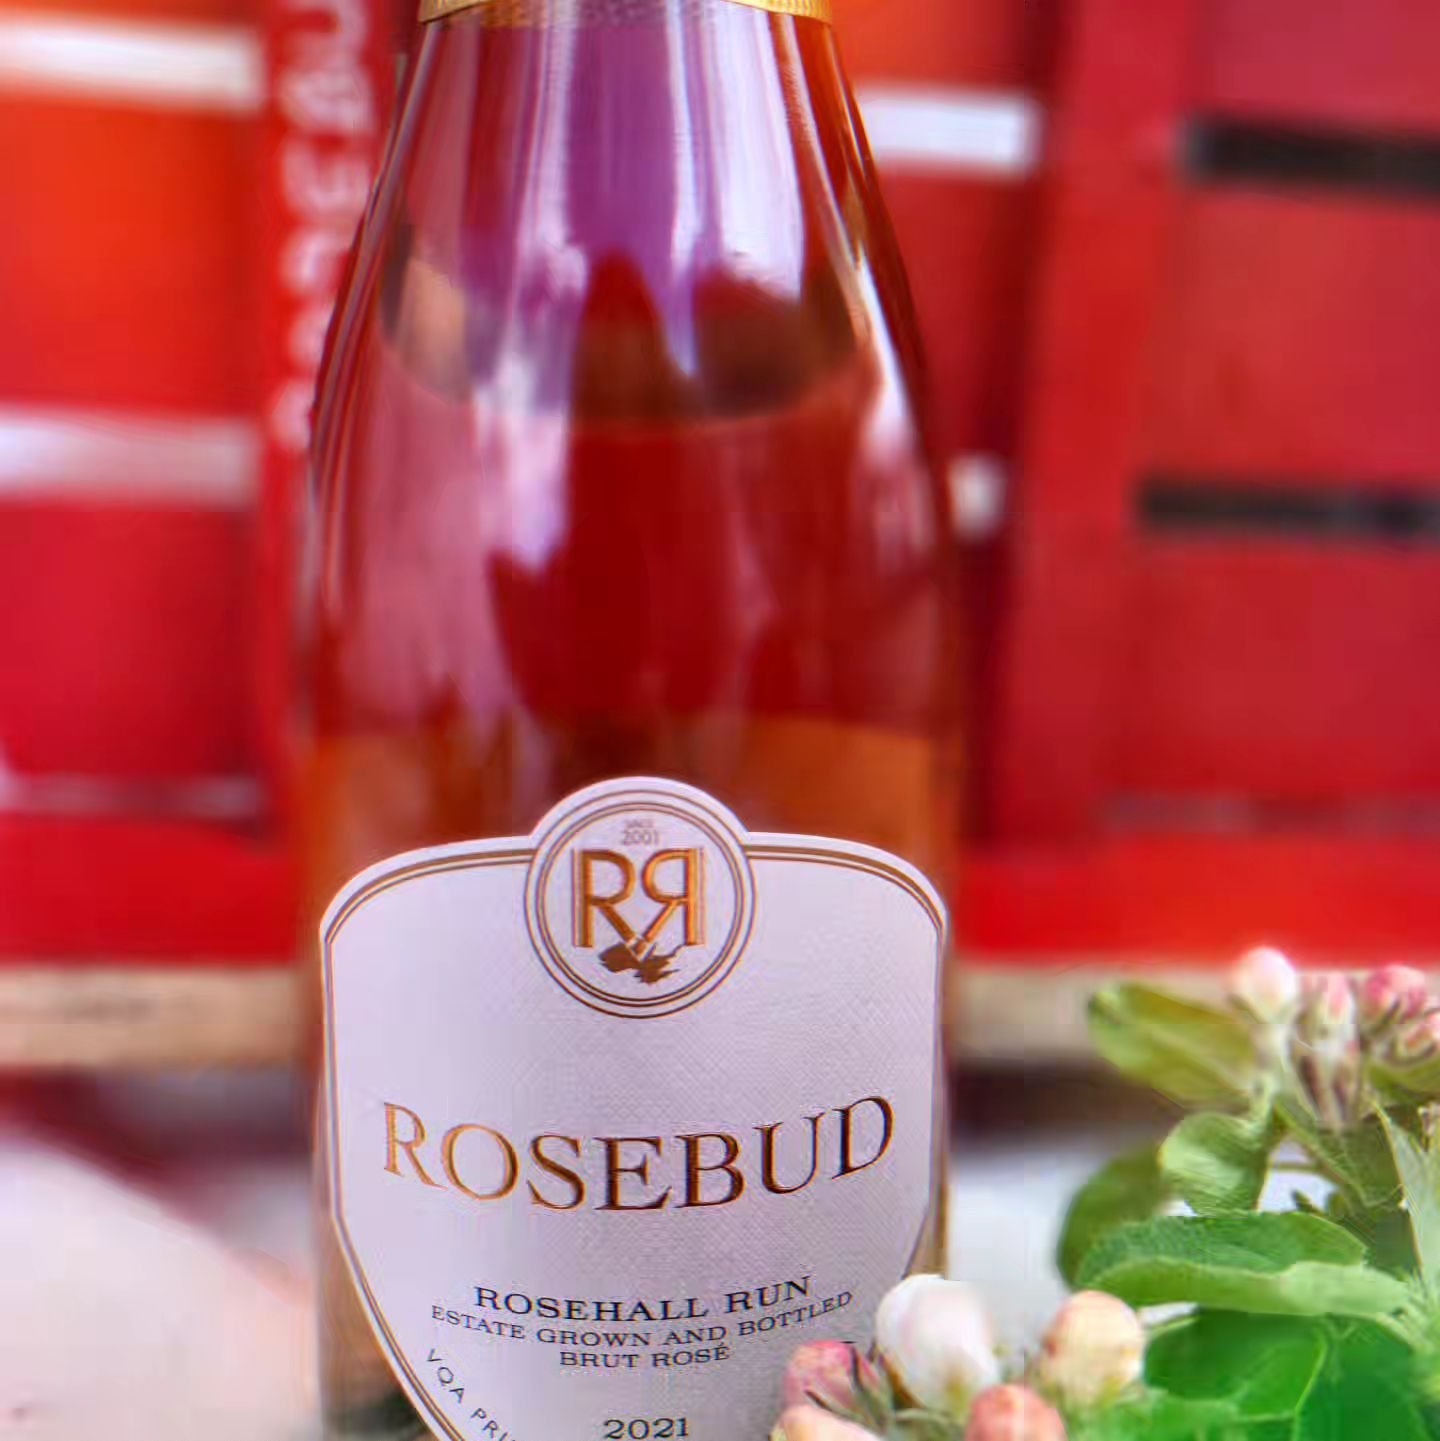 🌹🌹🌹NEW RELEASE!!! What's better than a dozen roses?  Just one very special Rosebud, and you know we can't resist a good movie or music reference.

Just like Citizen Kane, this 100% Pinot Noir Traditional Method Sparkling from the 2021 vintage is a